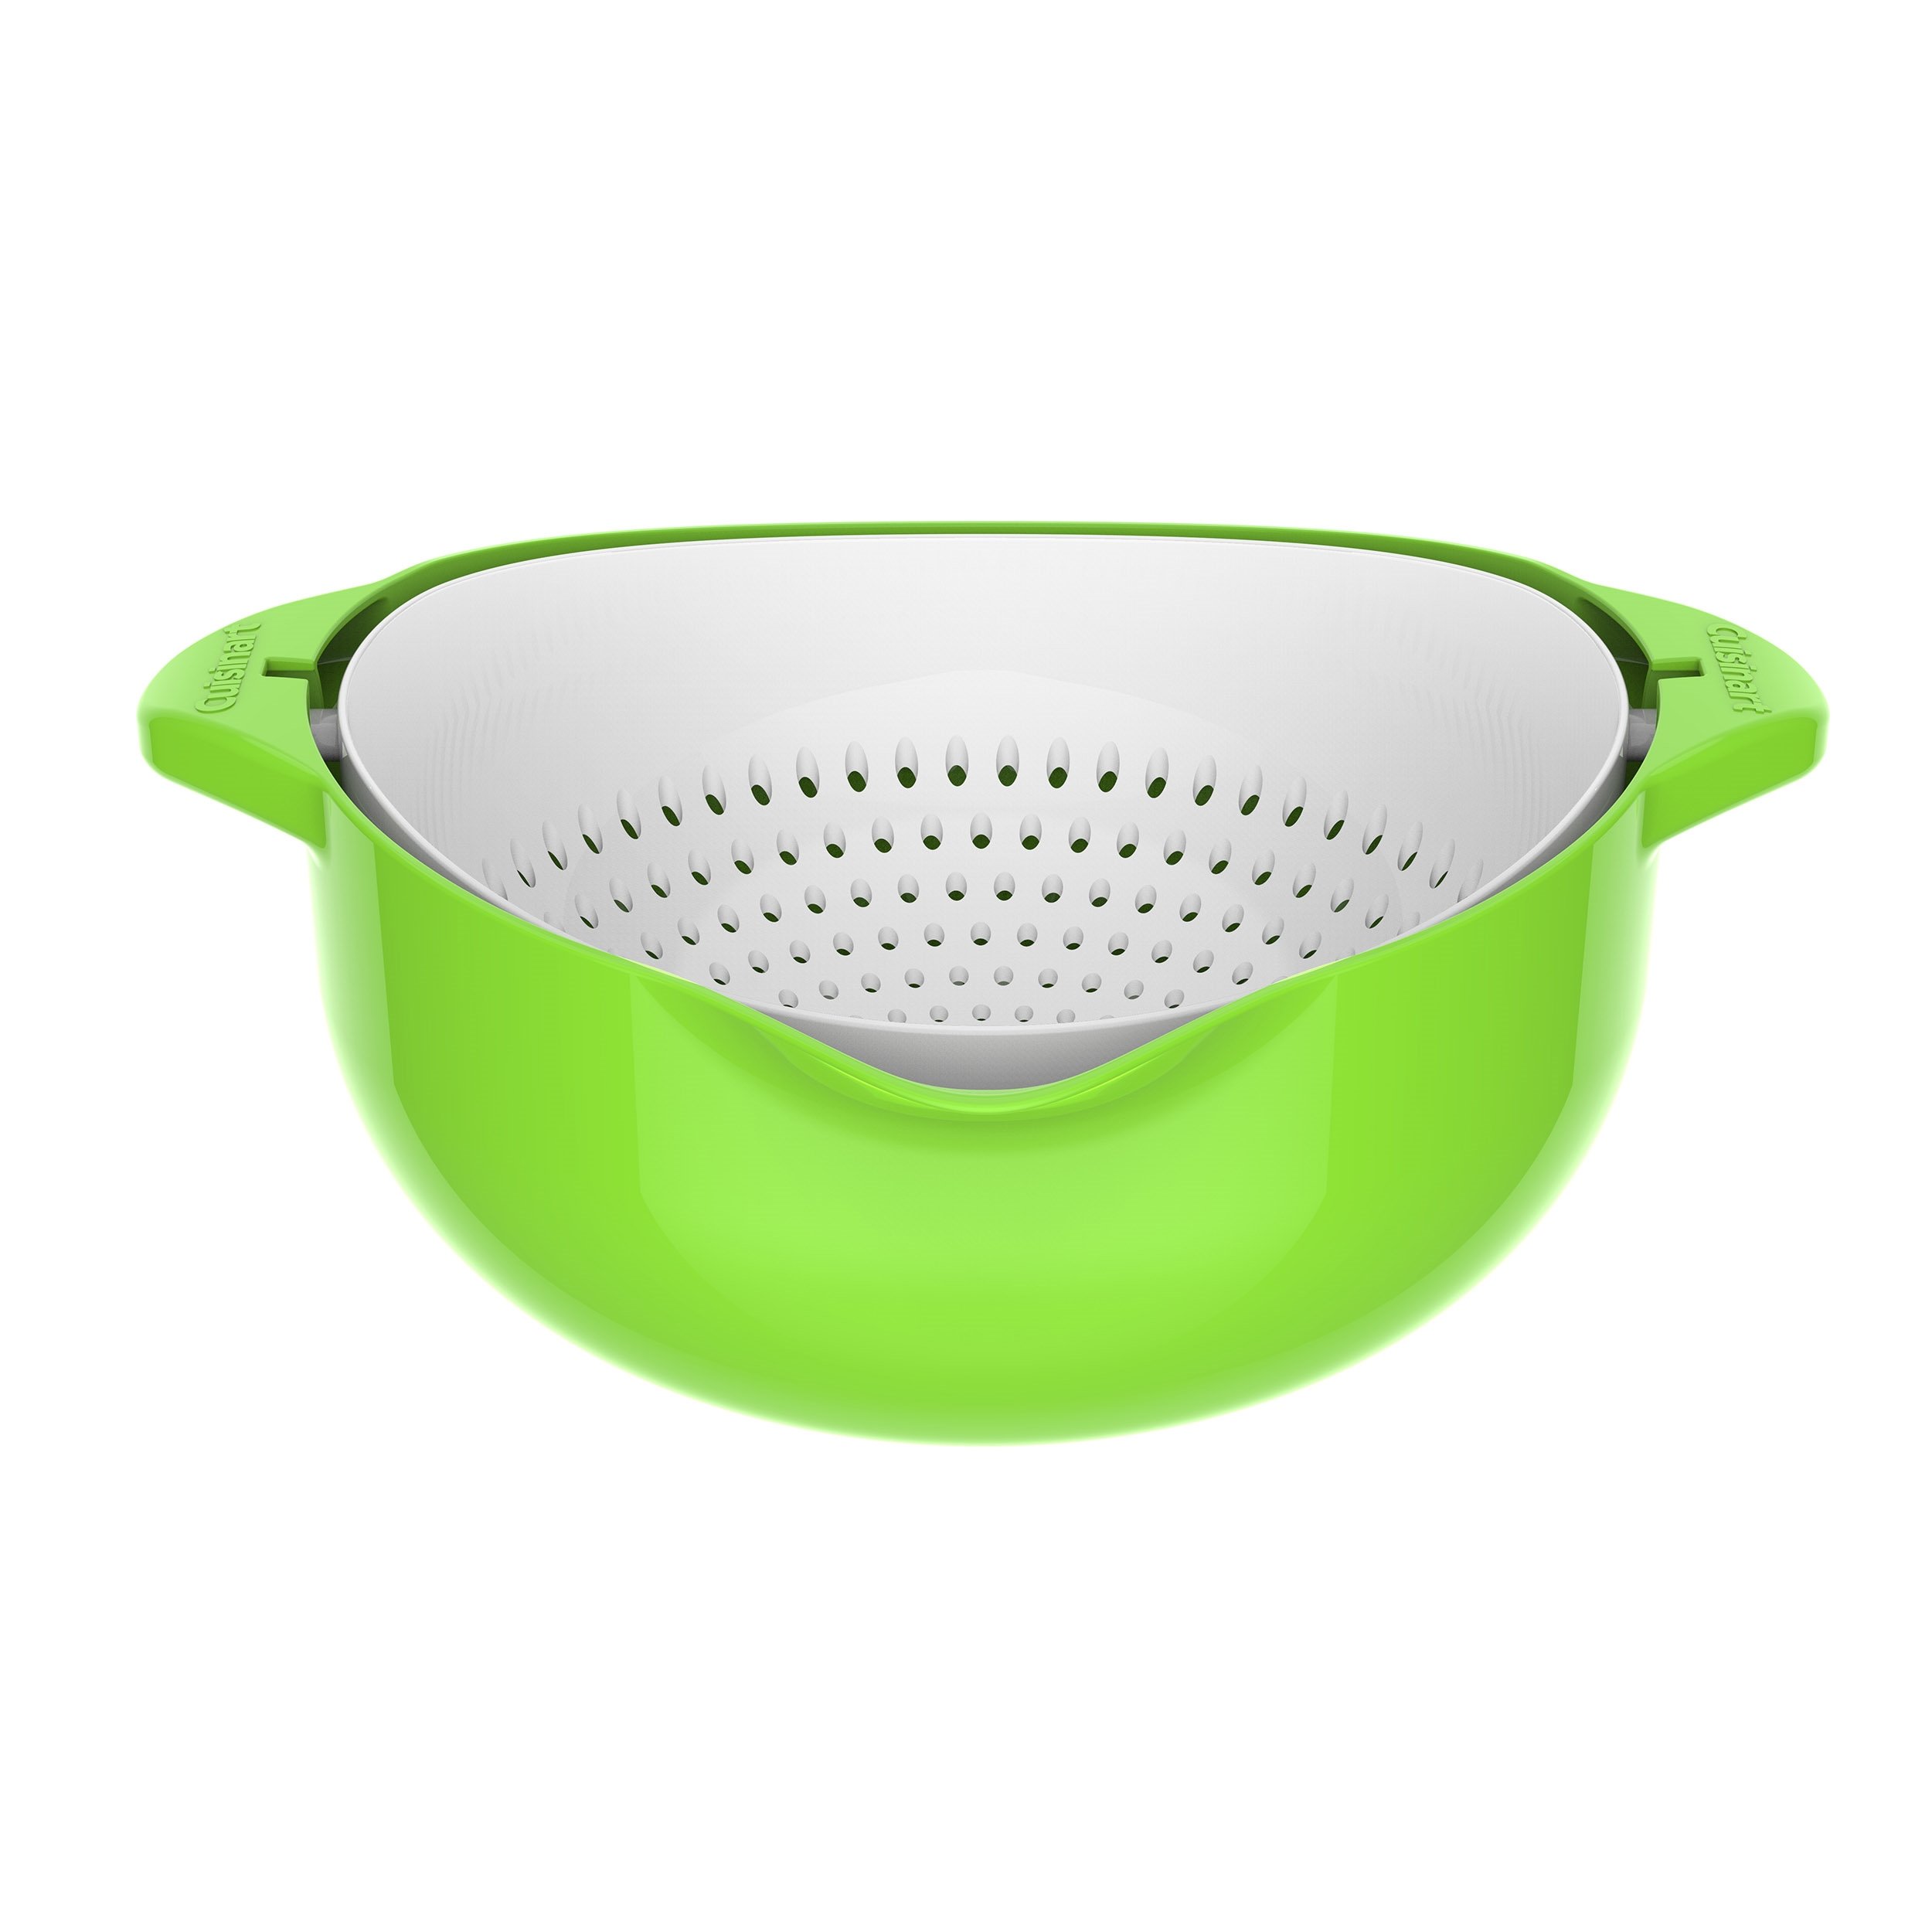 OXO Good Grips Stainless Steel 5 qt./ 4.7 L Colander